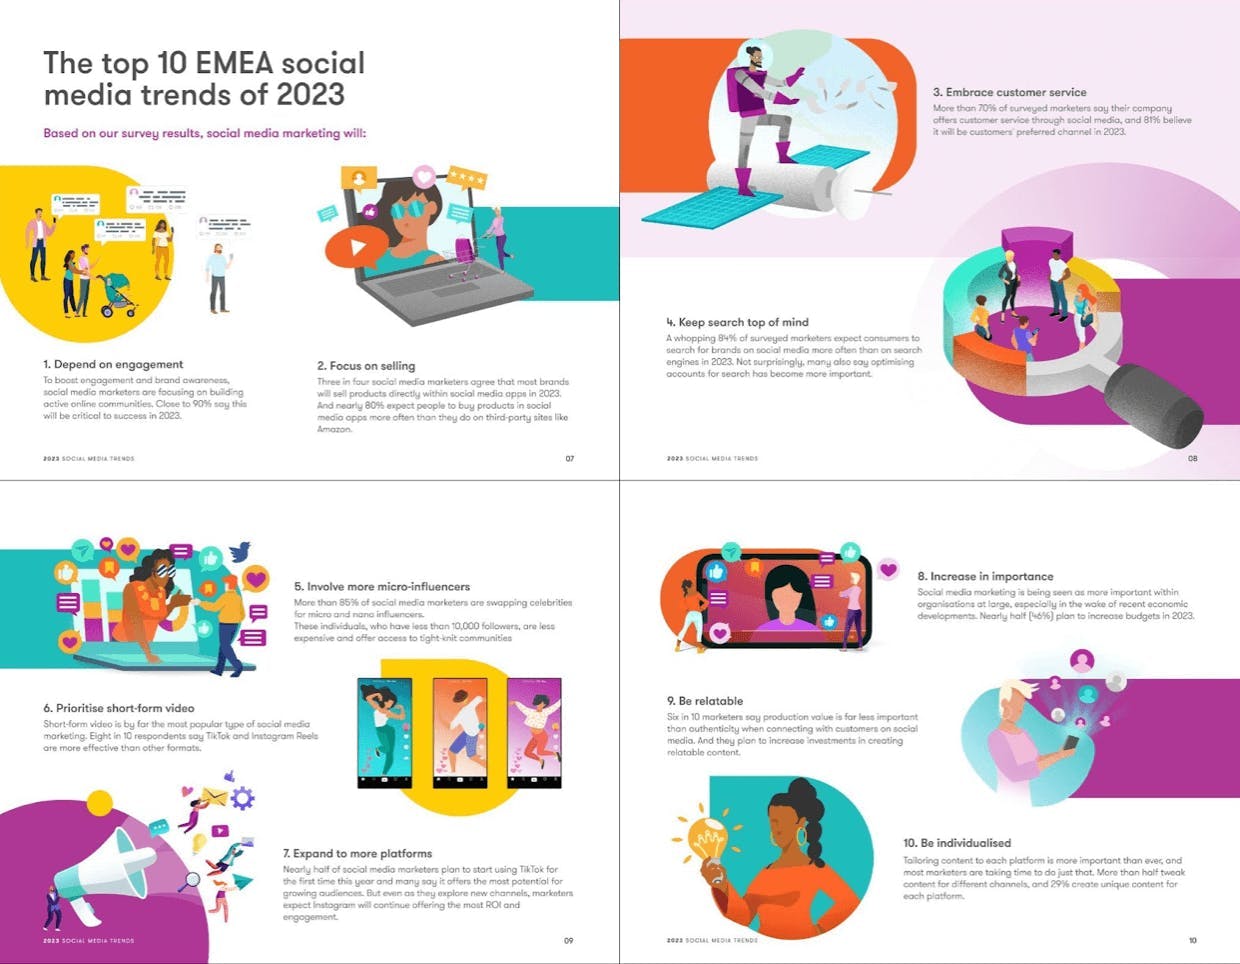 Infographic with the top 10 social media trends in EMEA 2023